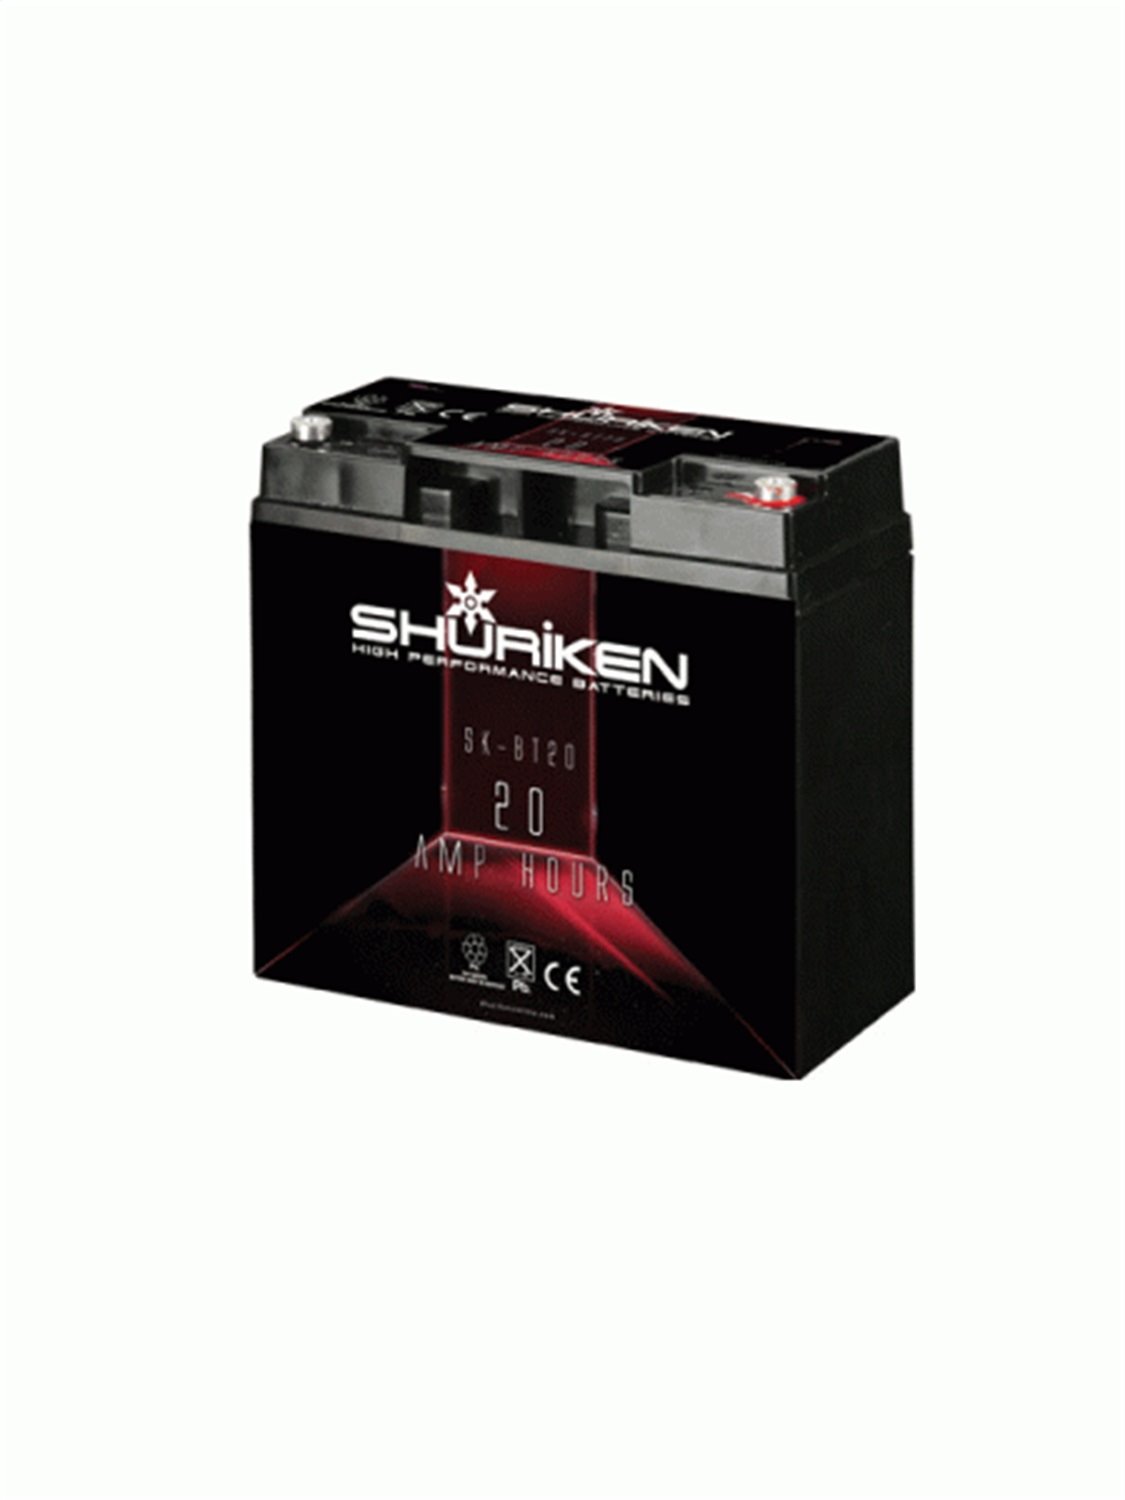 SK-BT20 Battery, Size: 7.5 in. x 6.5 in. x 3 in., Weight: 14 lbs., 20 AMP Hours, Use For Audio Systems Up To 600 Watts